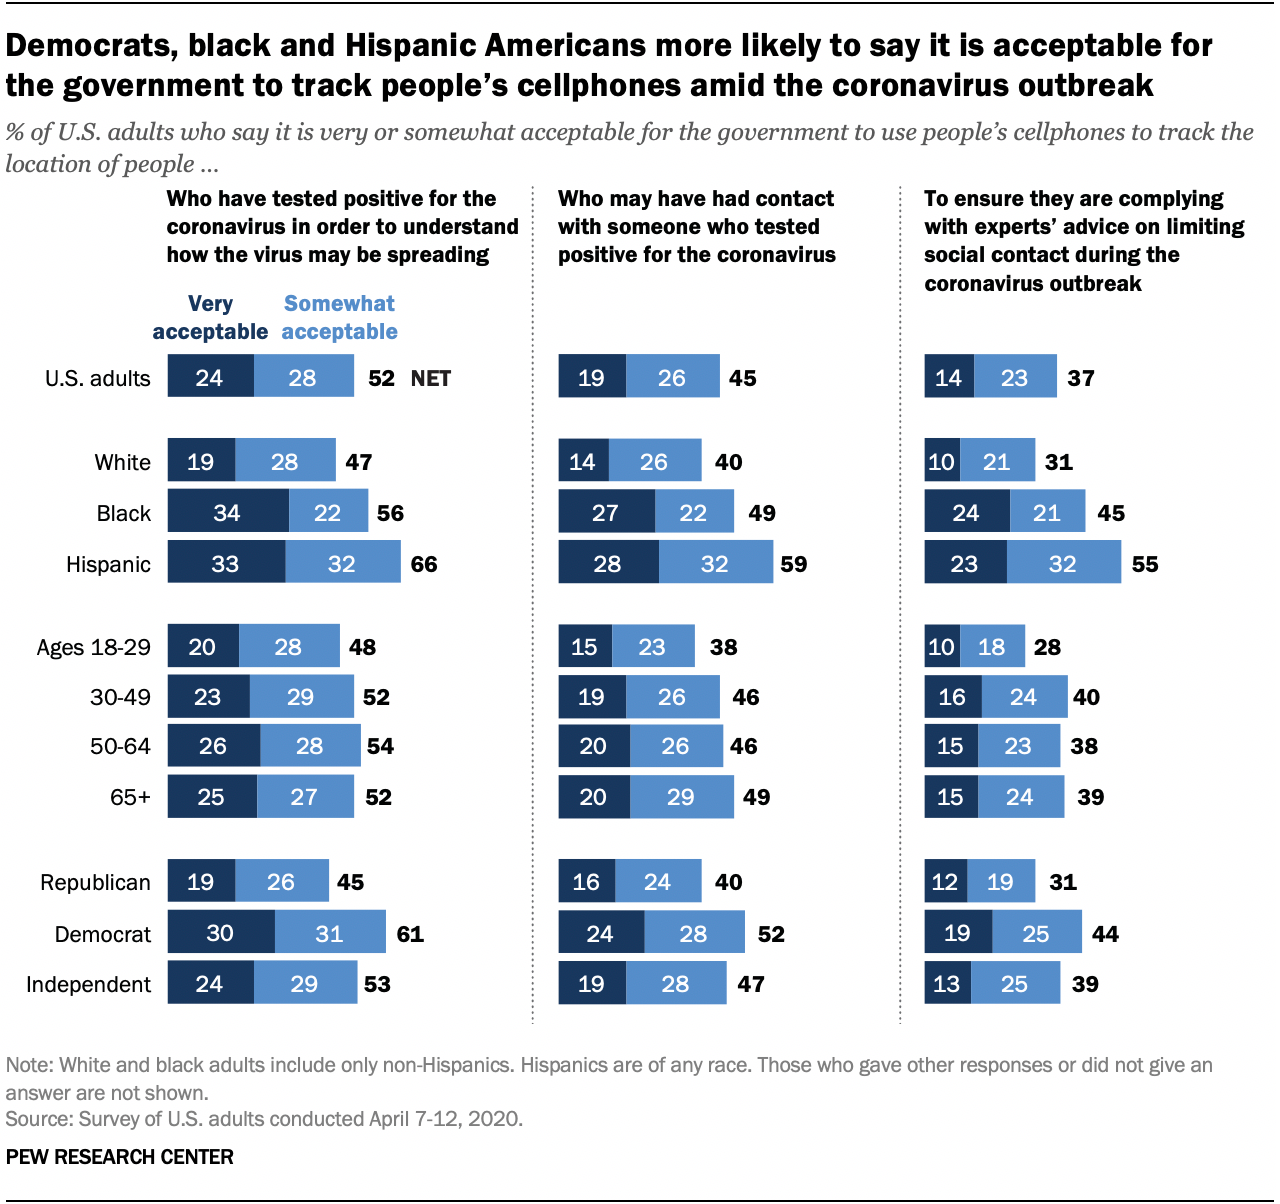 Democrats, black and Hispanic Americans more likely to say it is acceptable for the government to track people’s cellphones amid the coronavirus outbreak